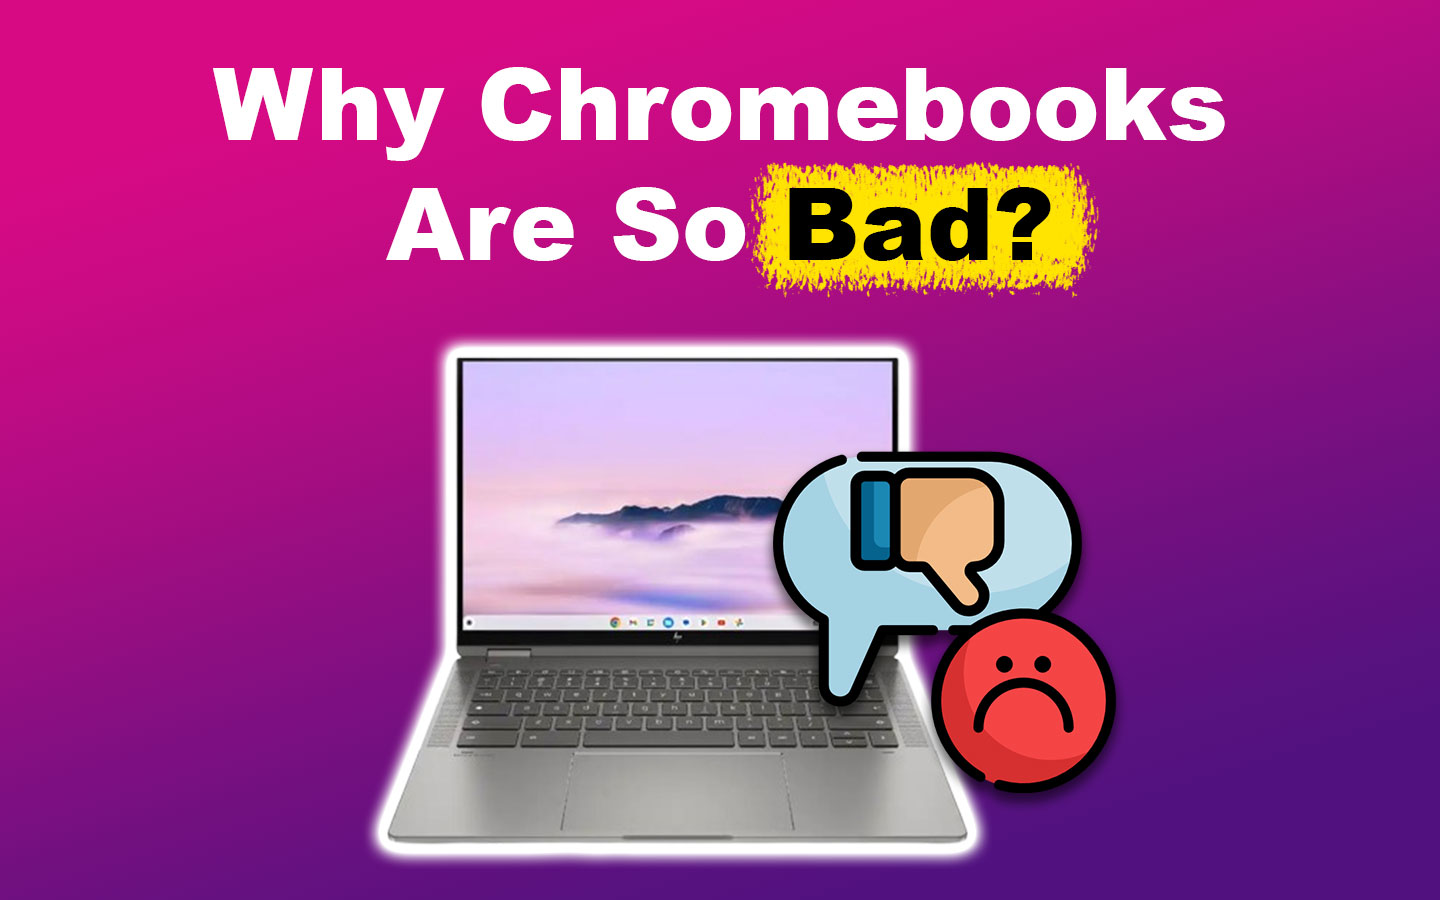 Why Are Chromebooks So Bad